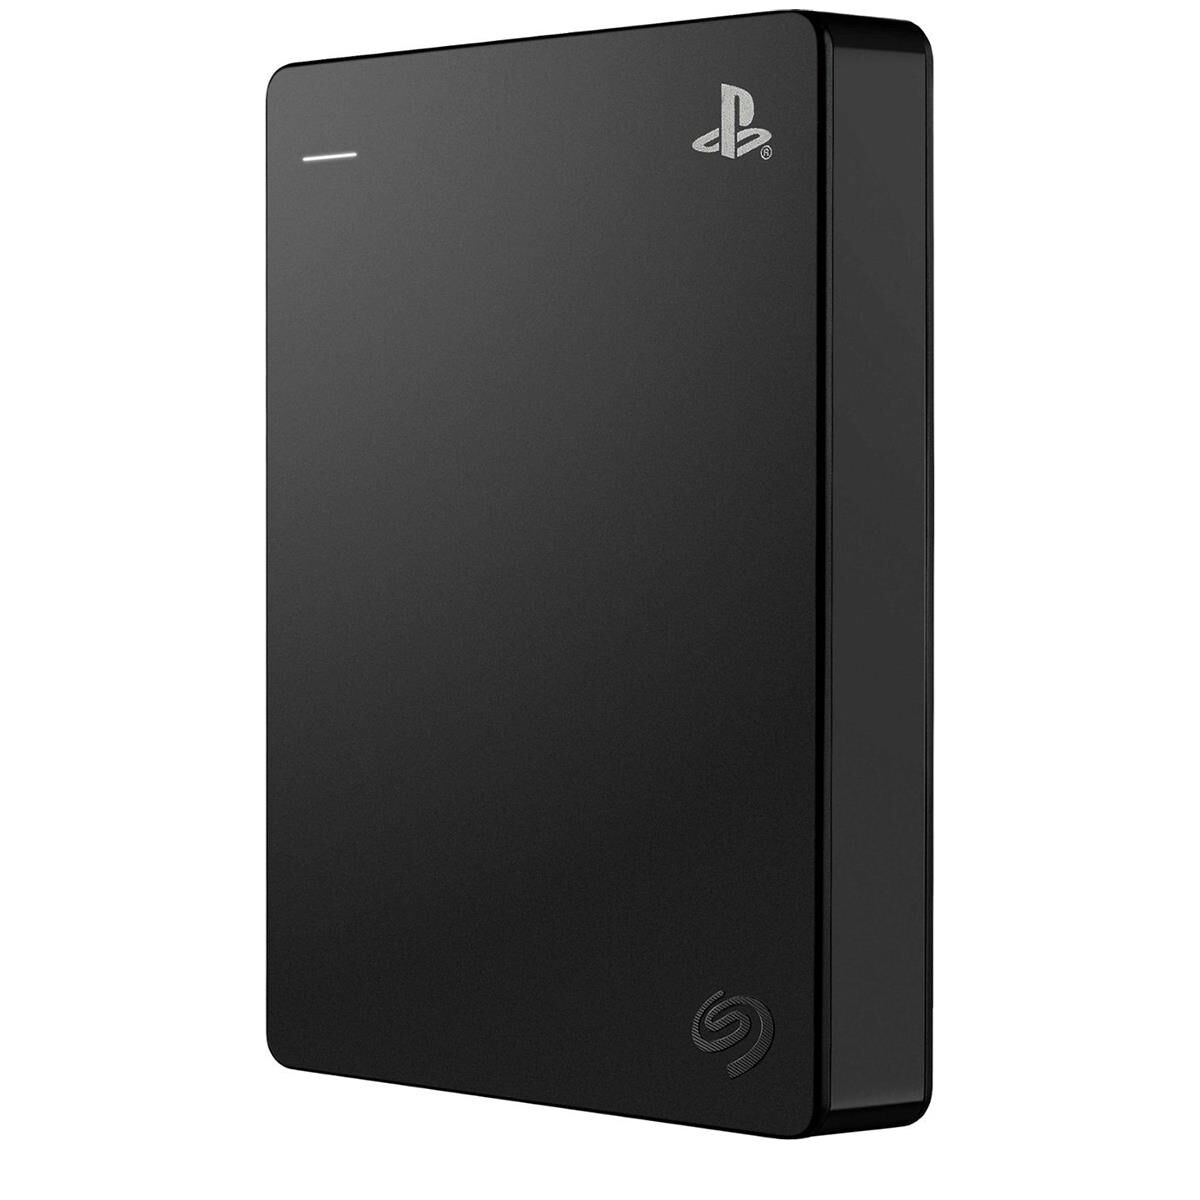 Seagate Game Drive 4TB USB 3.2 Gen 1 External Hard Drive for PlayStation, Black